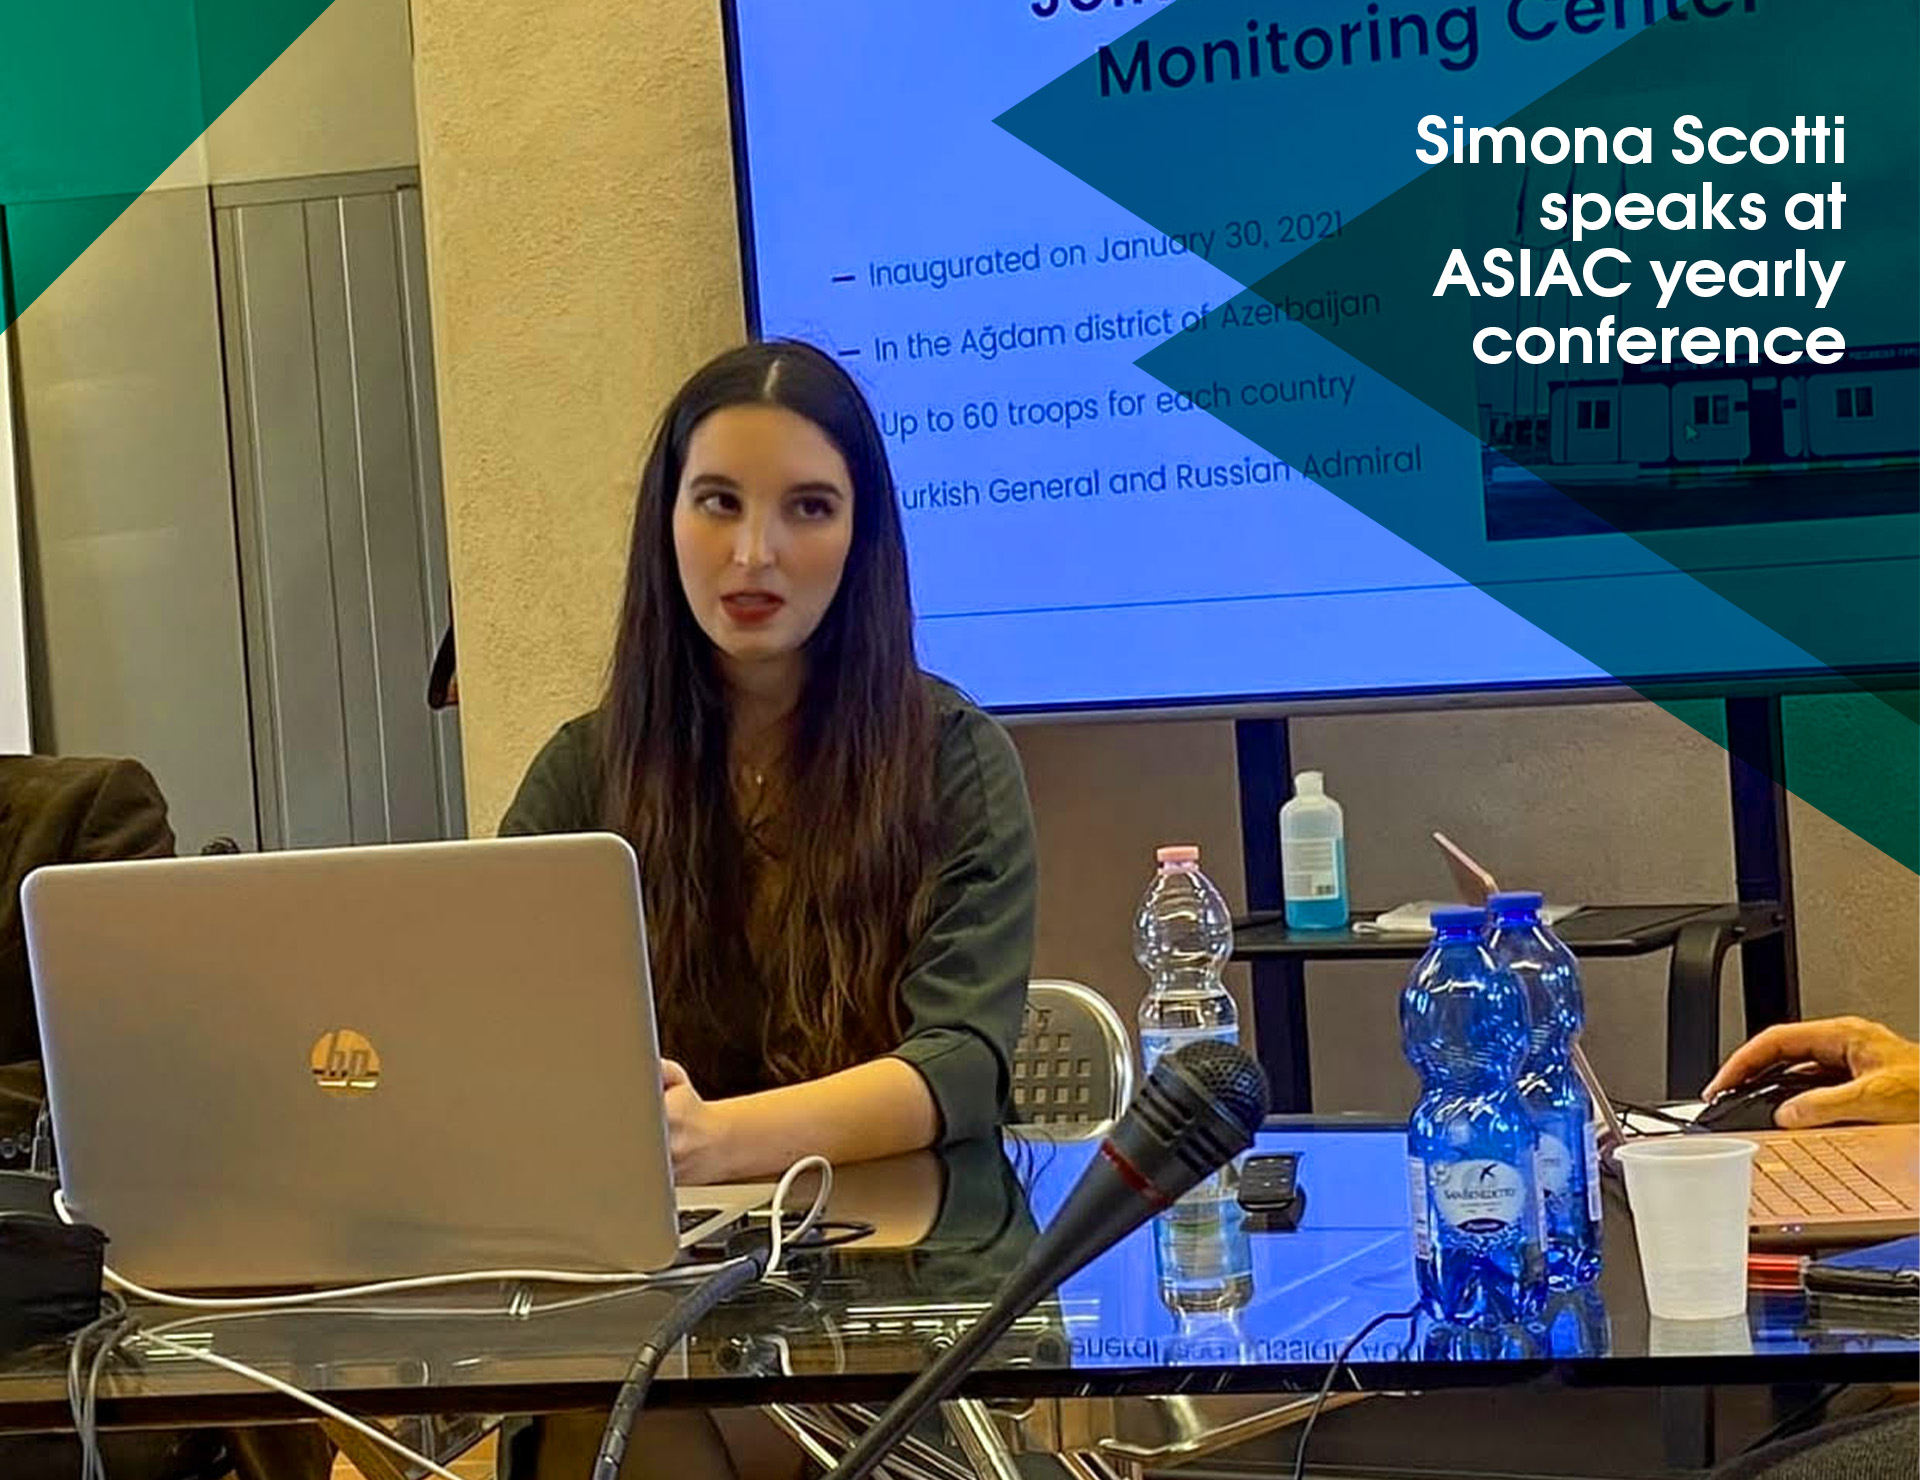 Simona Scotti speaks at ASIAC yearly conference